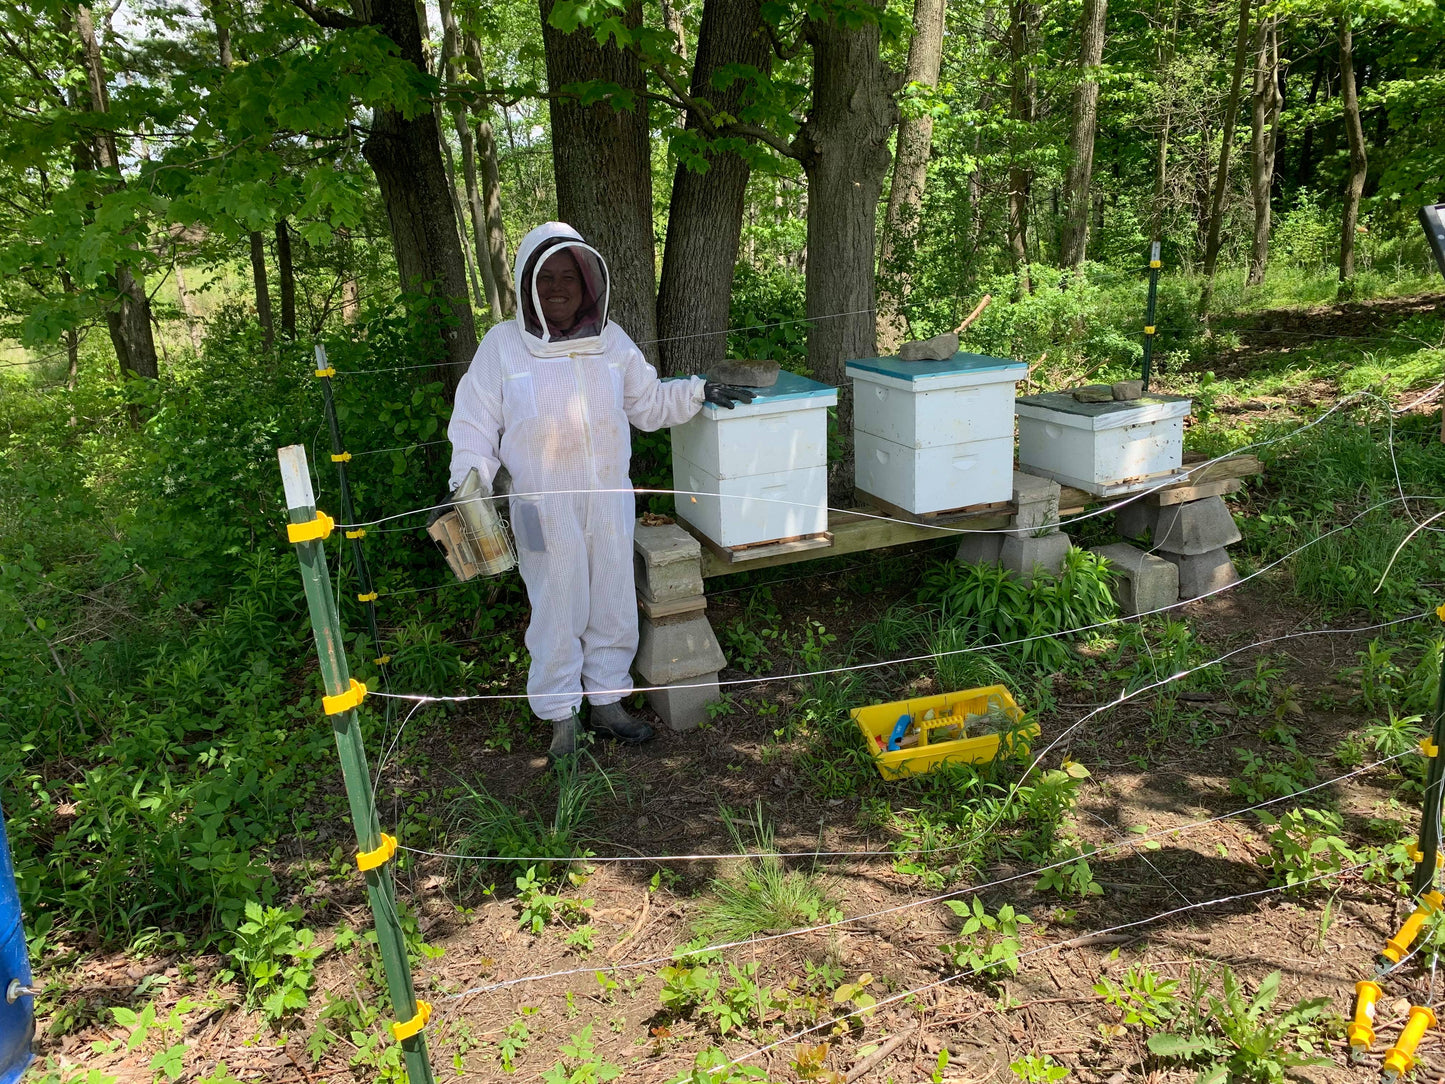 Joanna in full beekeeping white suit standing next to three white beehives.